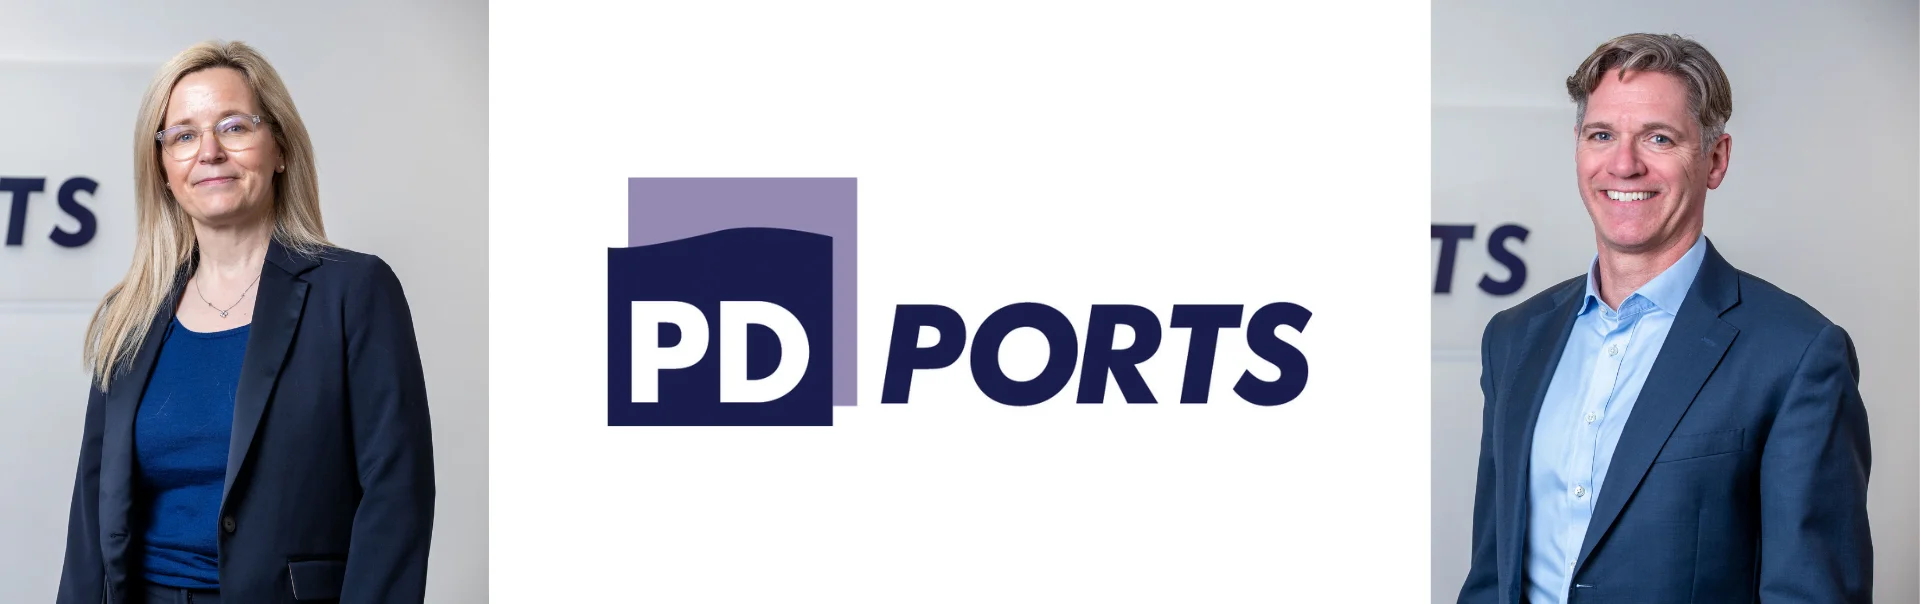 PD Ports announces changes to executive leadership team